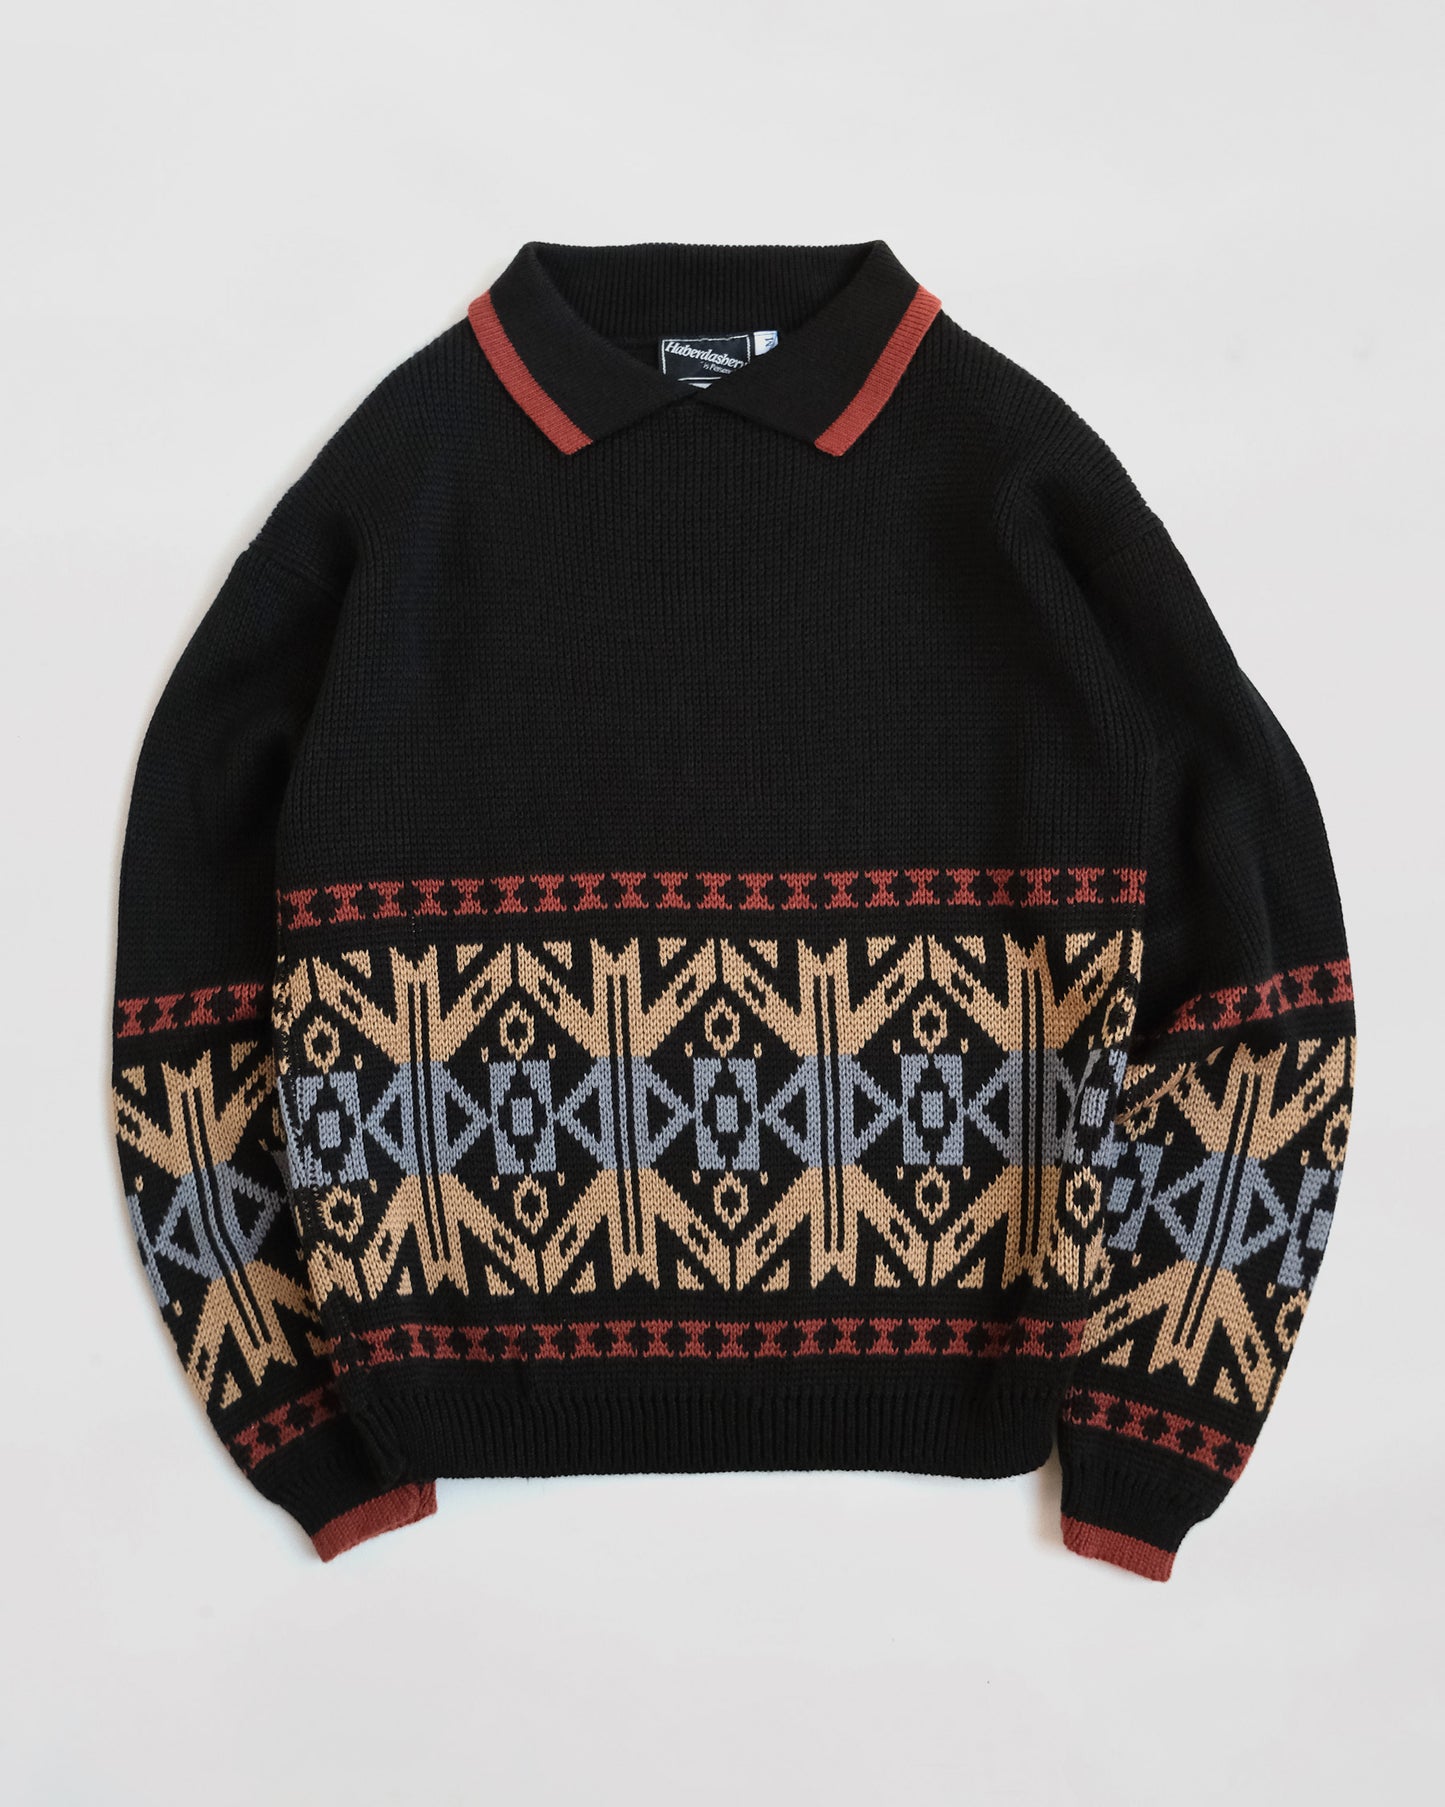 NOS 70's Sweater